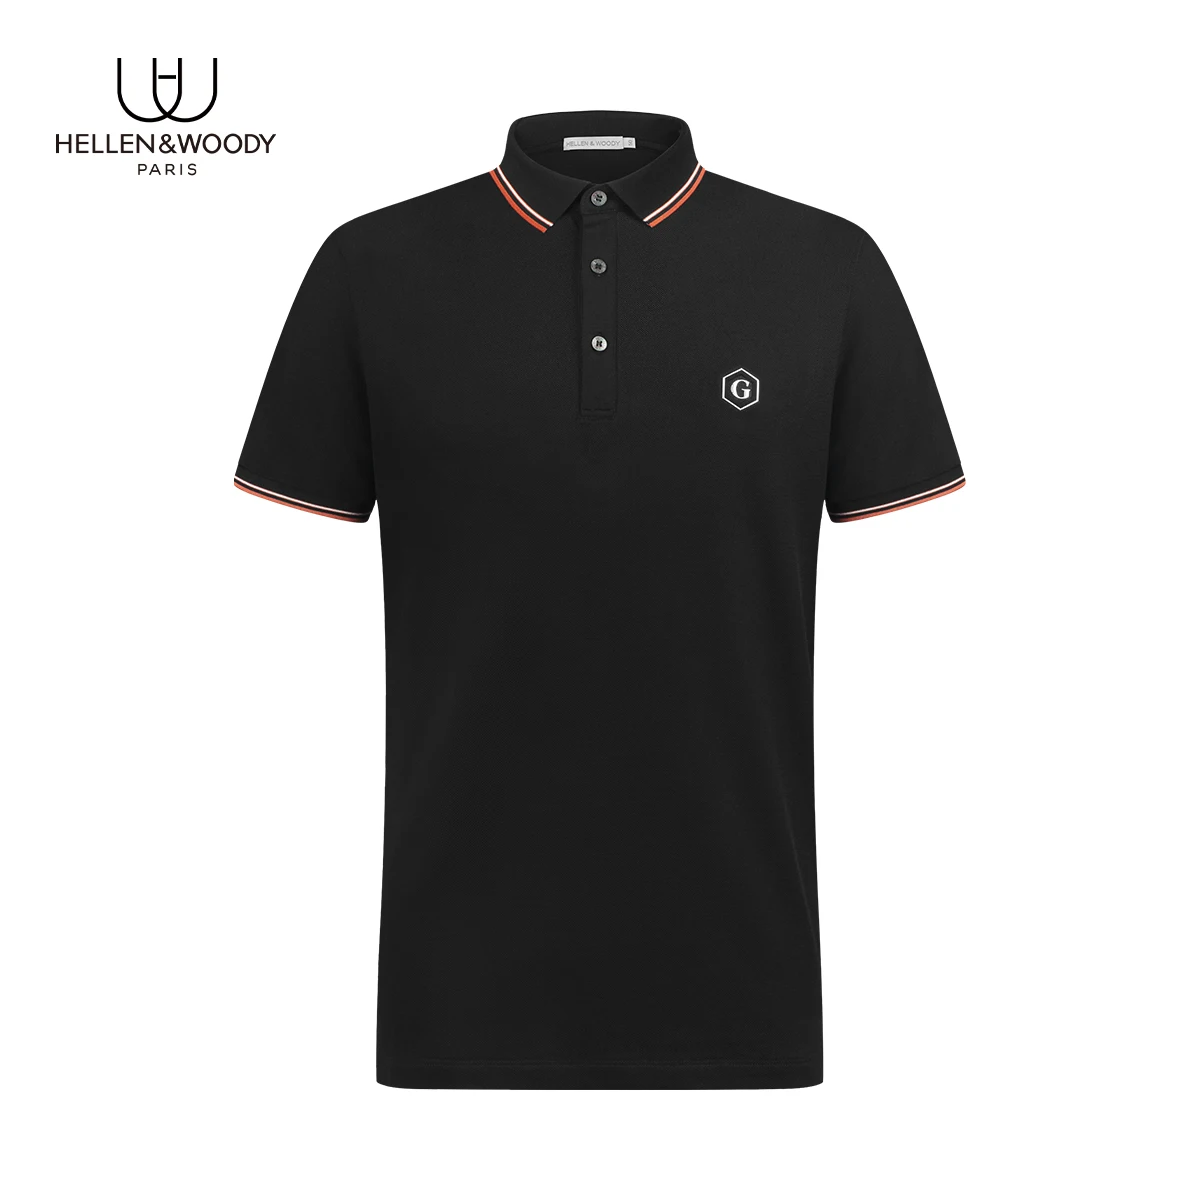 

Hellen&Woody 2021 SS New Arrival Luxury Men's Short Sleeve Sport Causal G Brand Printing 100% Pure Cotton Slim Fit Polo Shirt